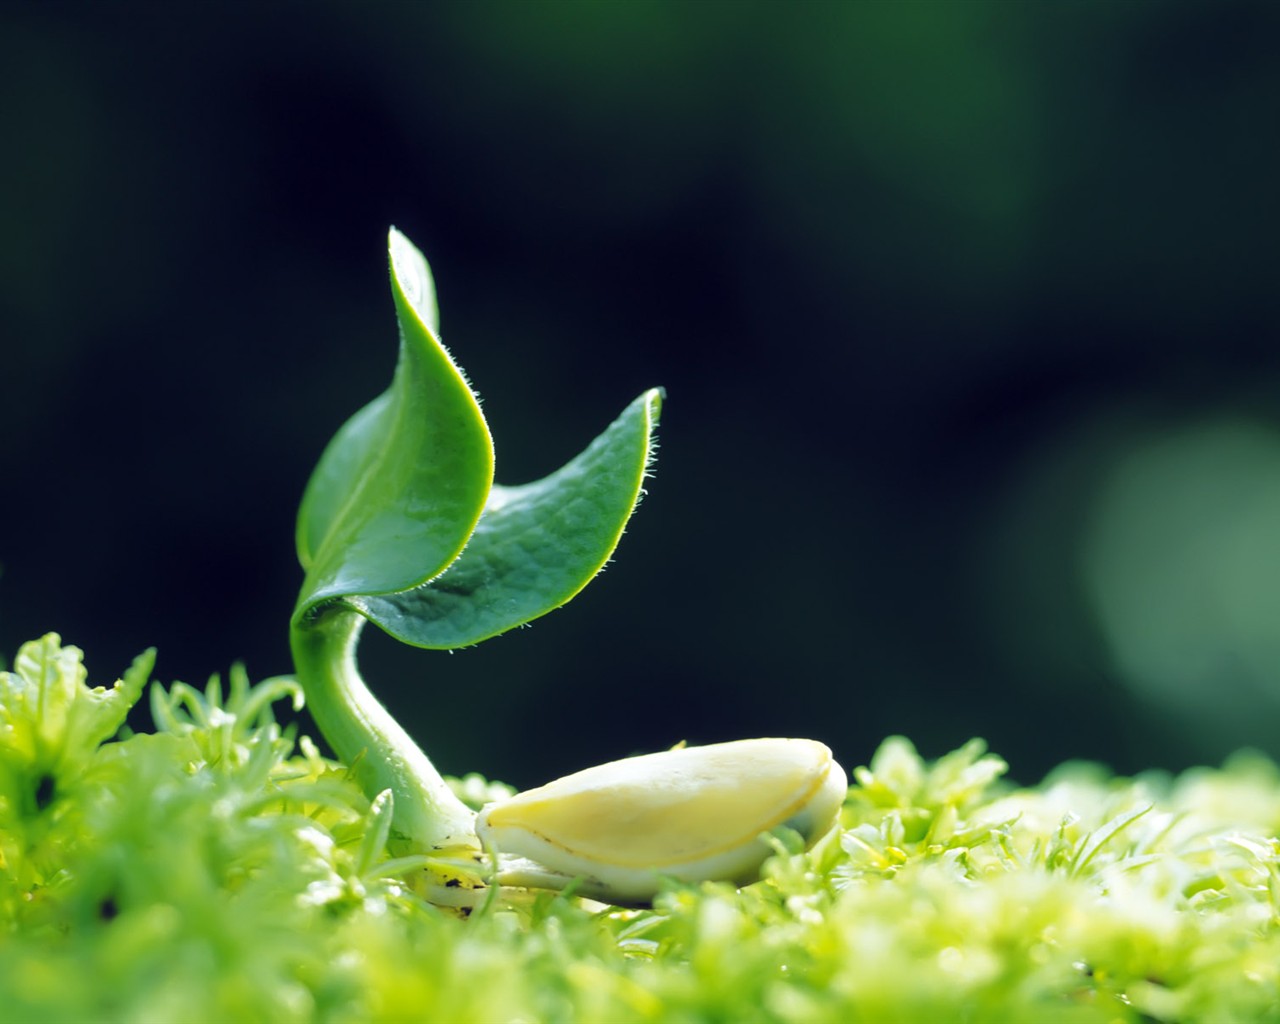 Sprout leaves HD Wallpaper (1) #39 - 1280x1024